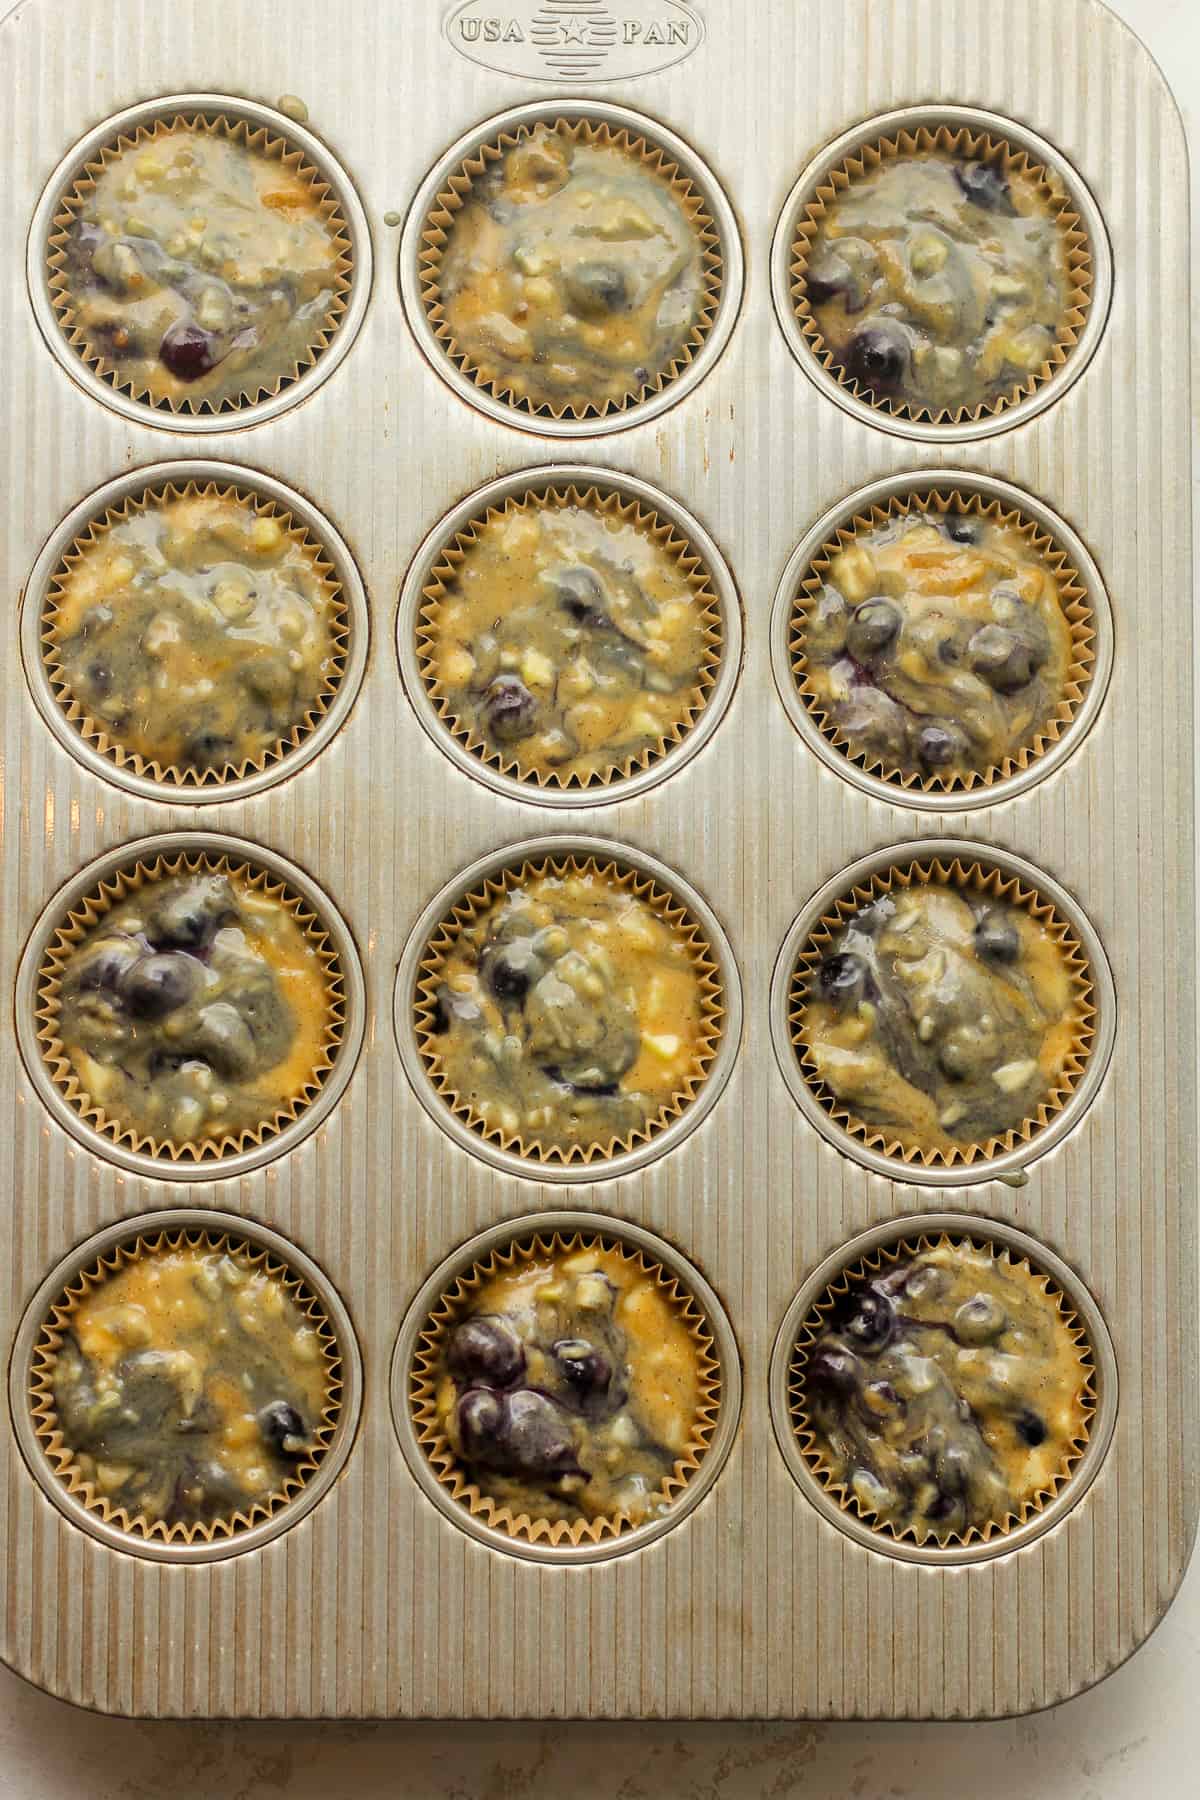 The muffin batter in the muffin tins.